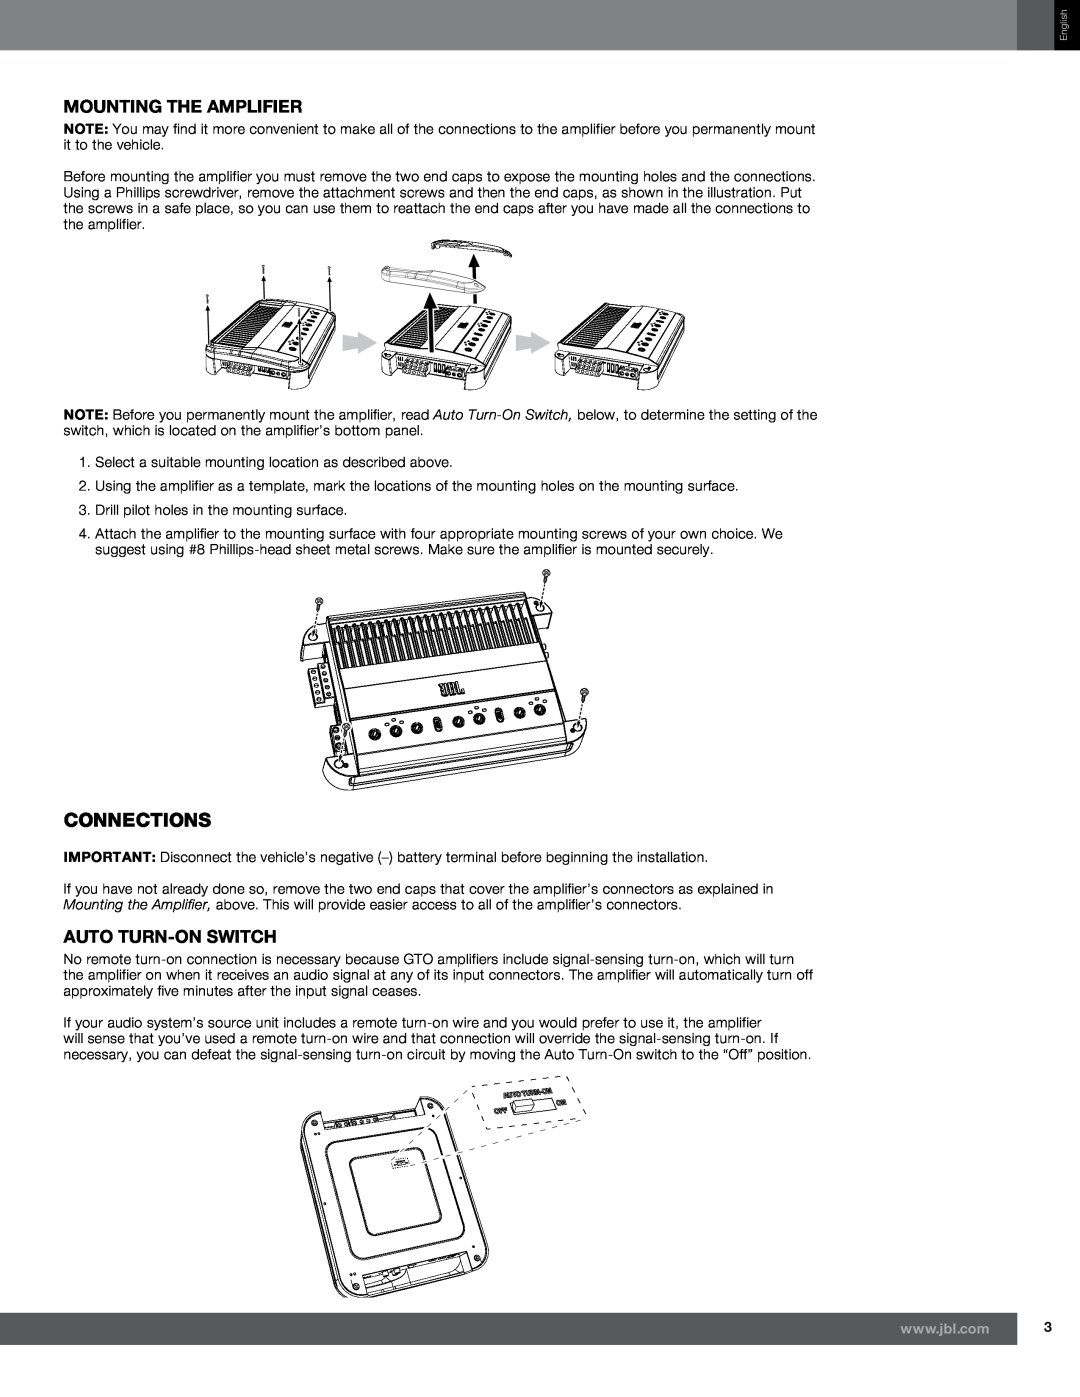 Harman GTO-5EZ, GTO-3EZ owner manual Connections, Mounting the Amplifier, Auto Turn-OnSwitch 